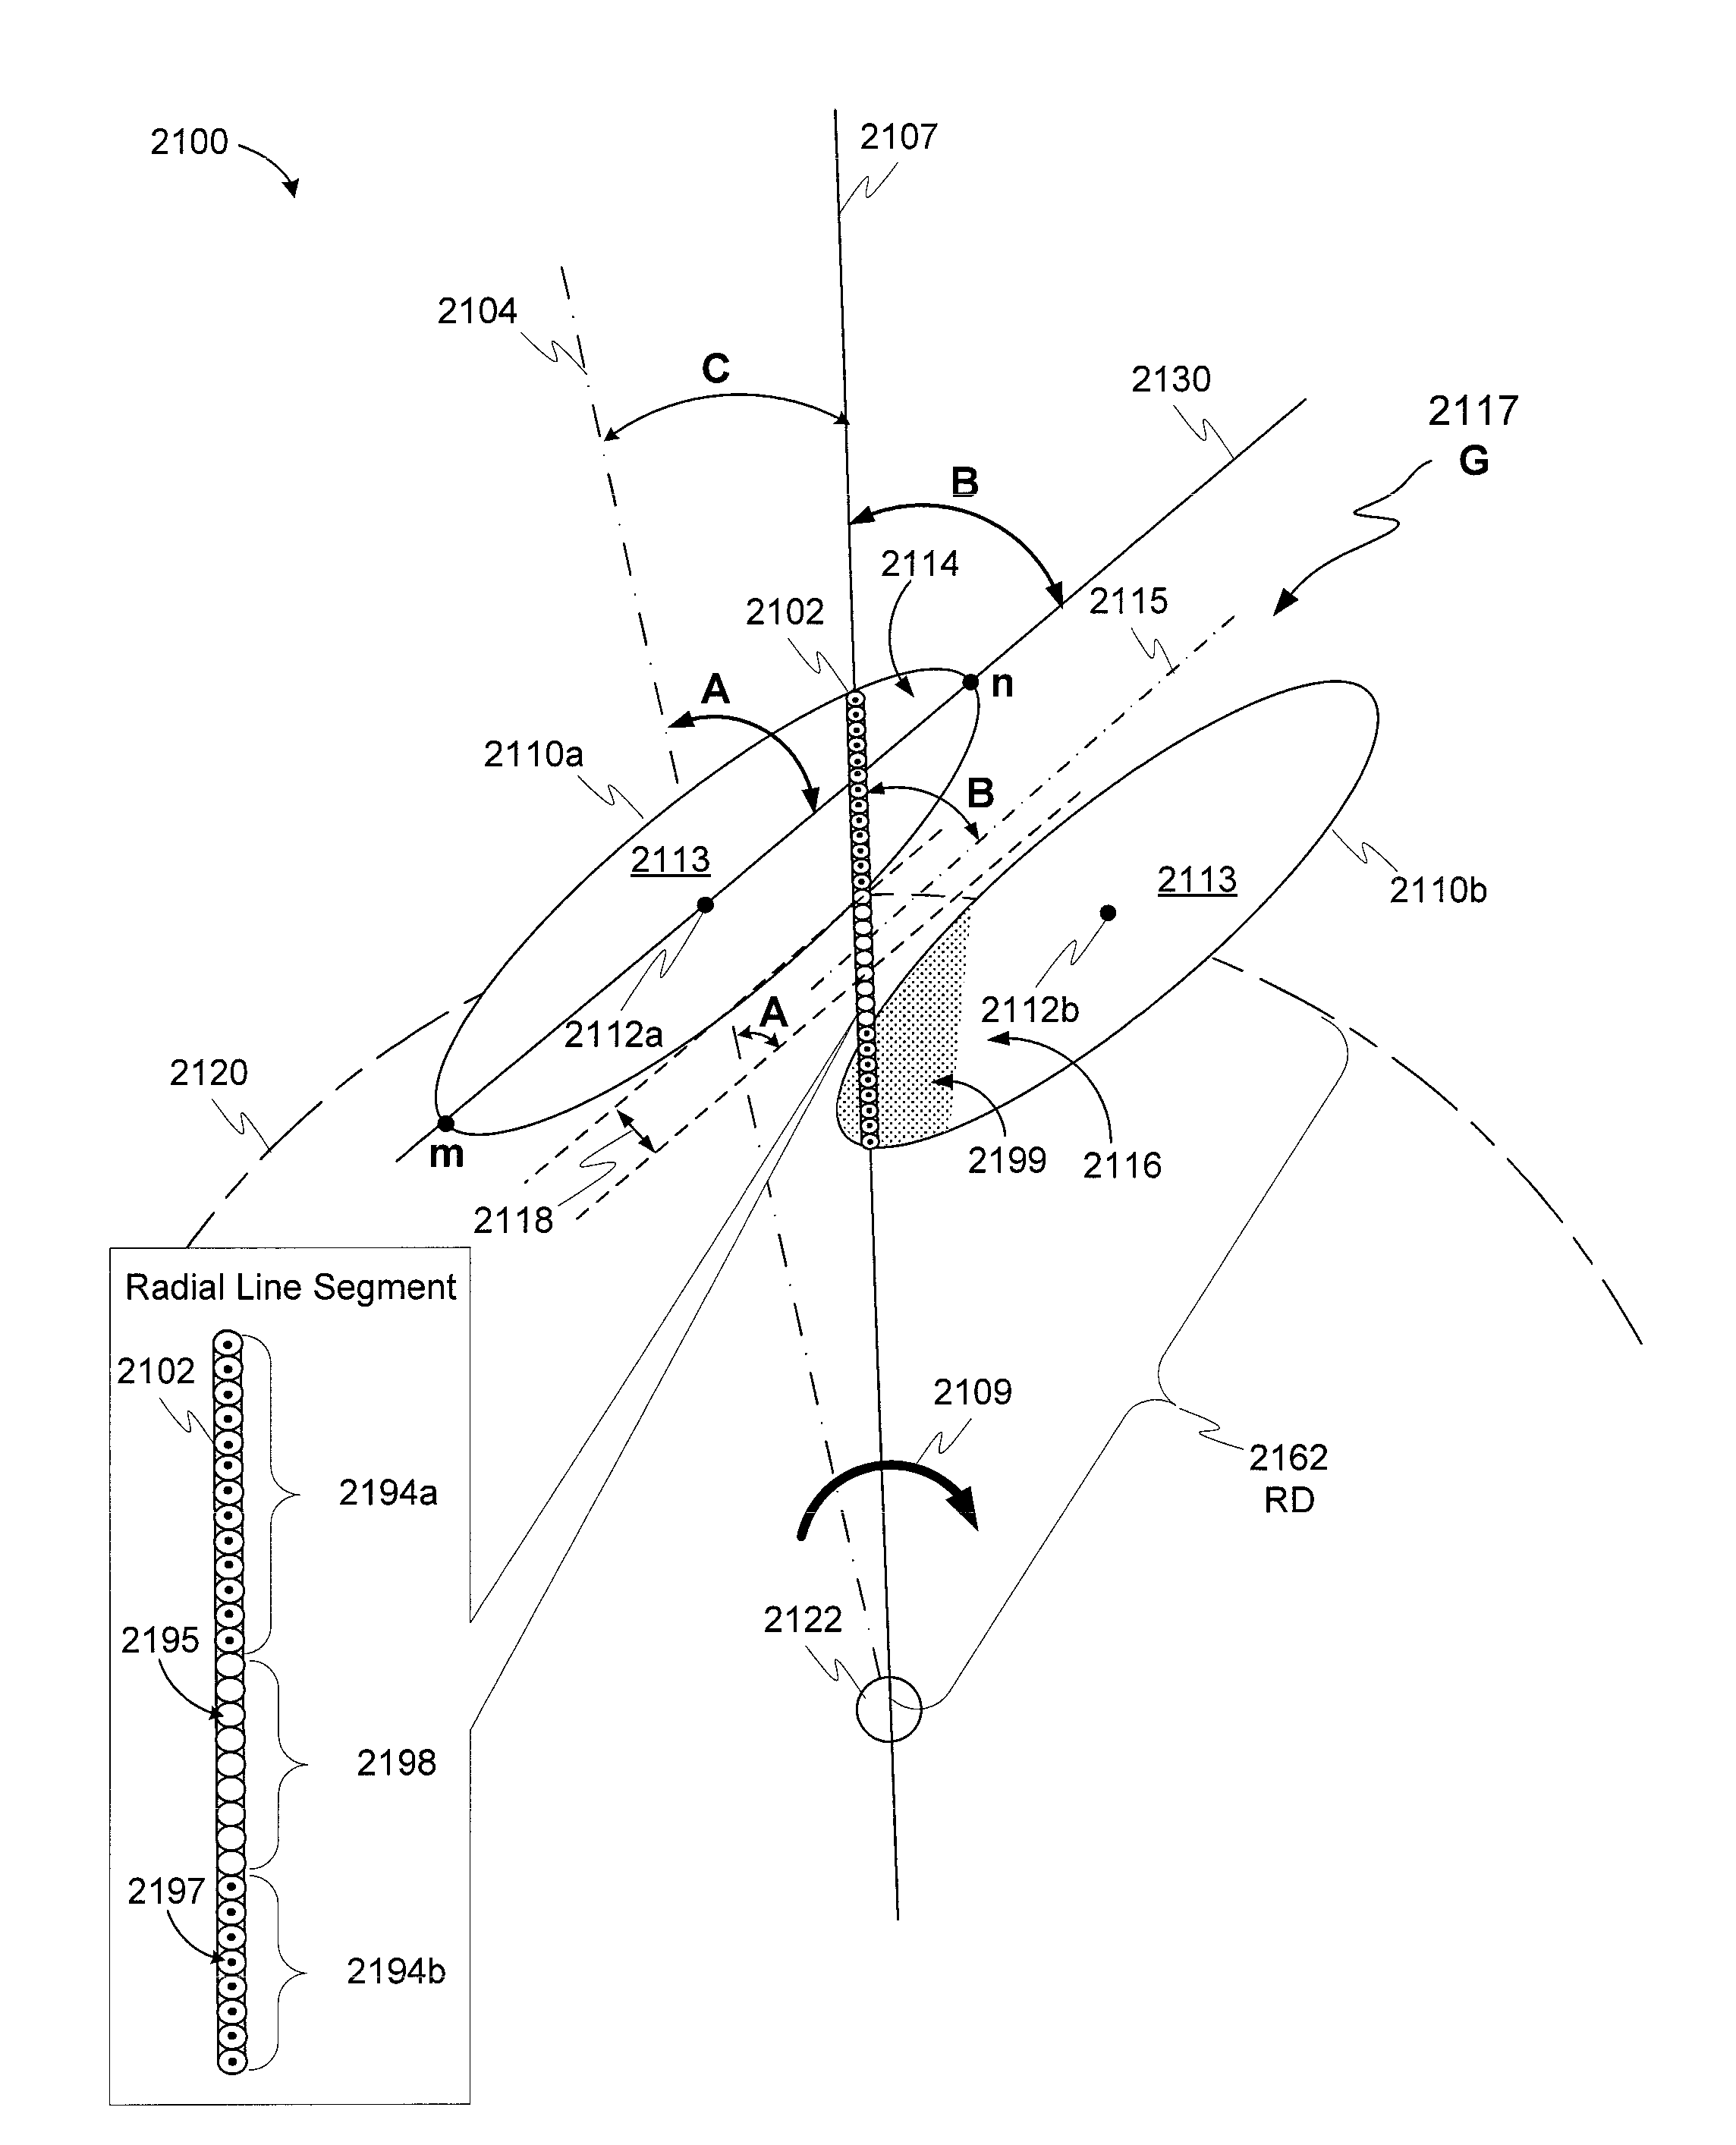 Stator and rotor-stator structures for electrodynamic machines